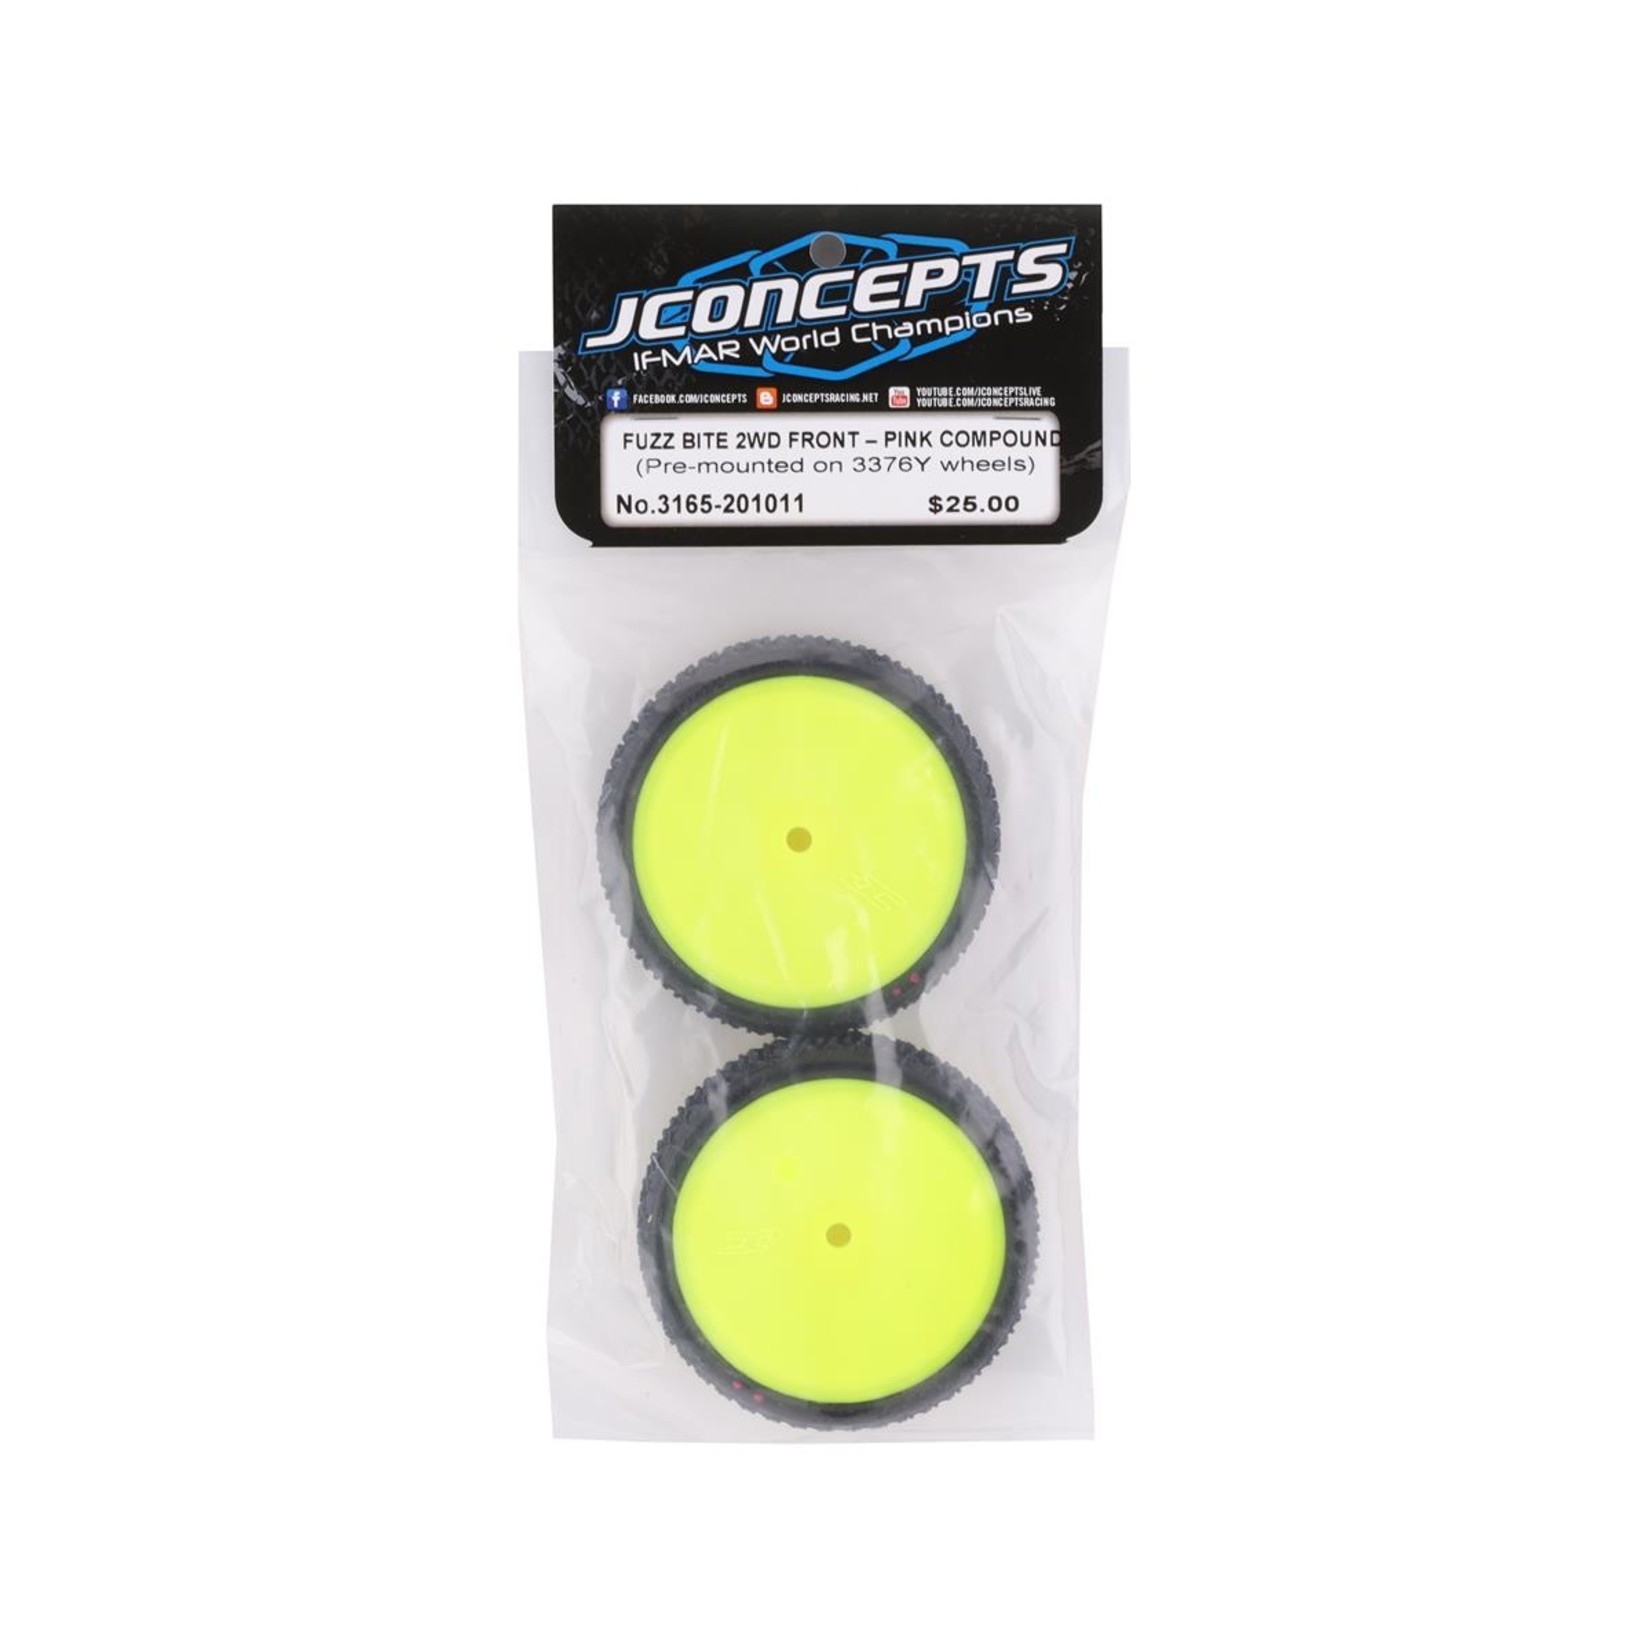 JConcepts JConcepts Fuzz Bite LP 2.2 Mounted 2WD Front Buggy Tire (Yellow) (2) (Pink) (Carpet) w/12mm Hex #3165-201011